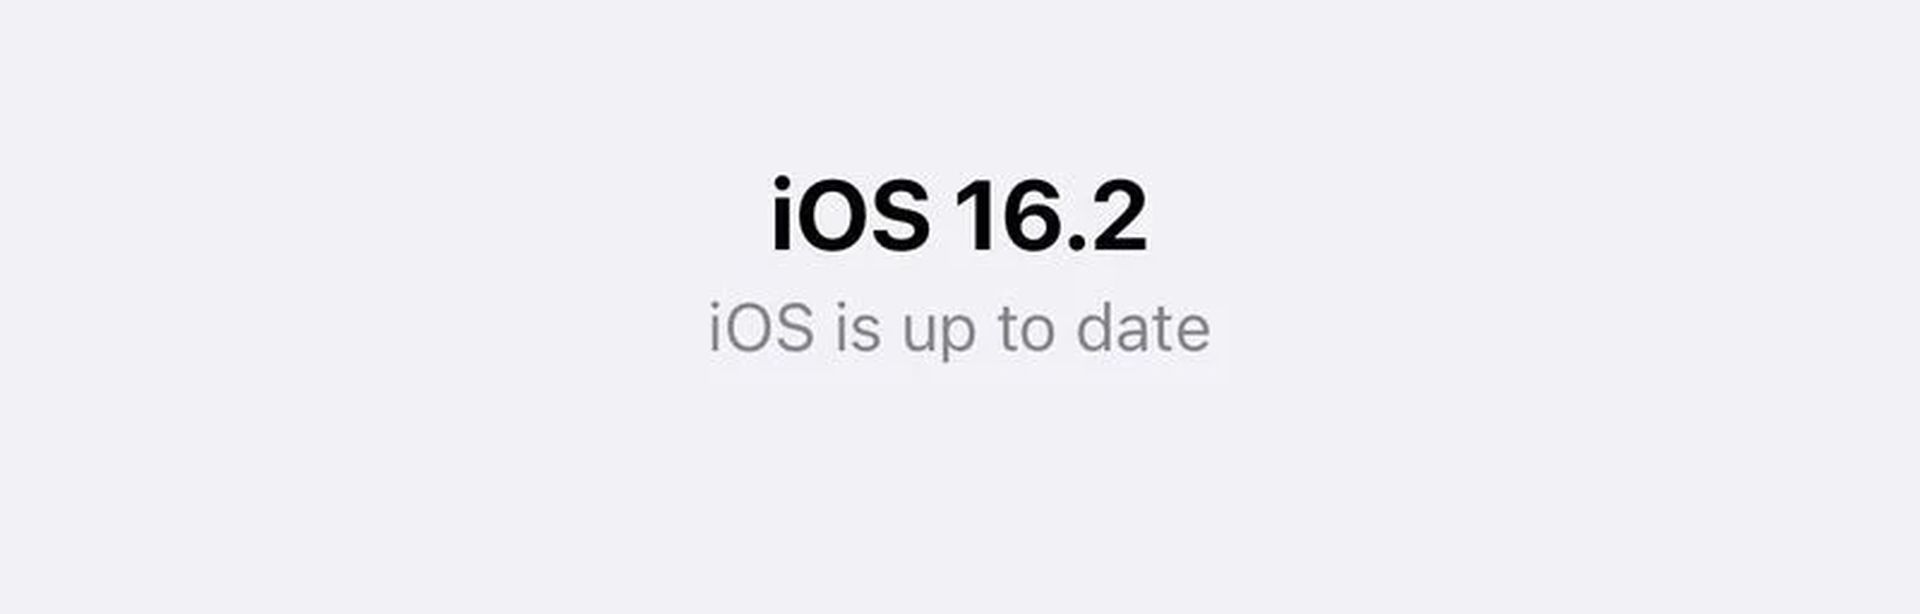 iOS 16.2 new features